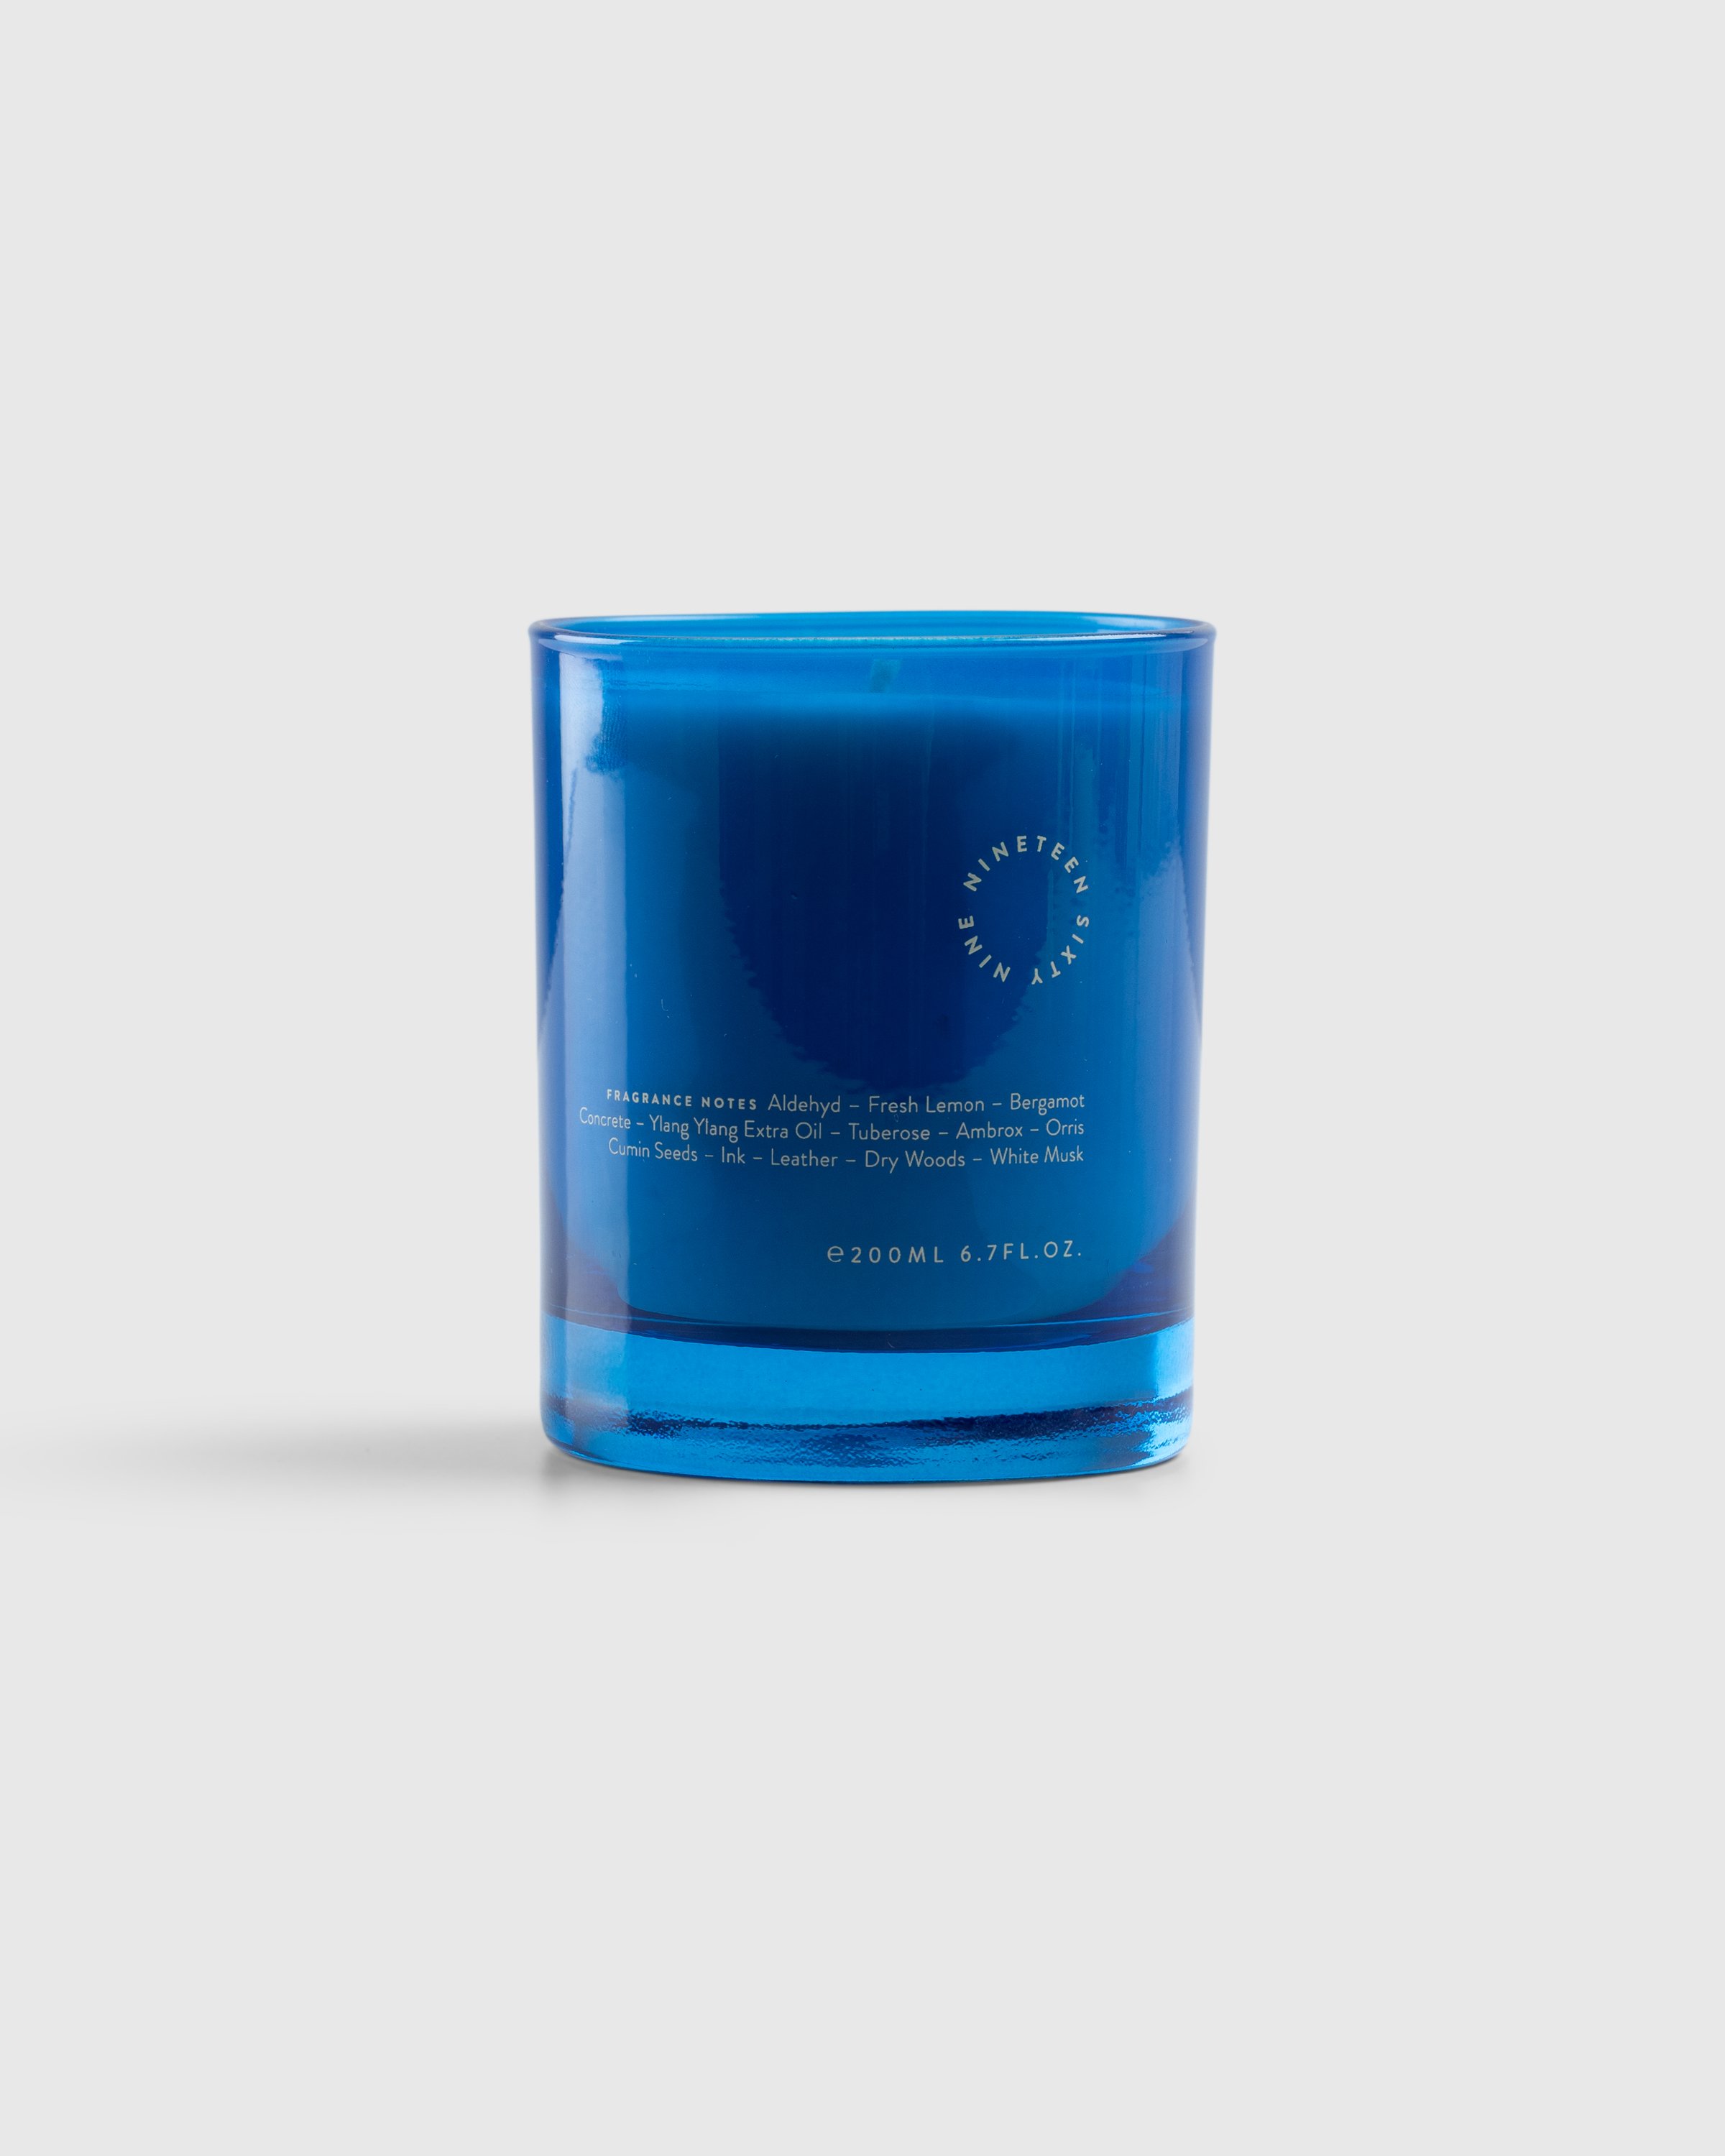 19-69 - L'air Barbes BP Candle - Lifestyle - Blue - Image 2